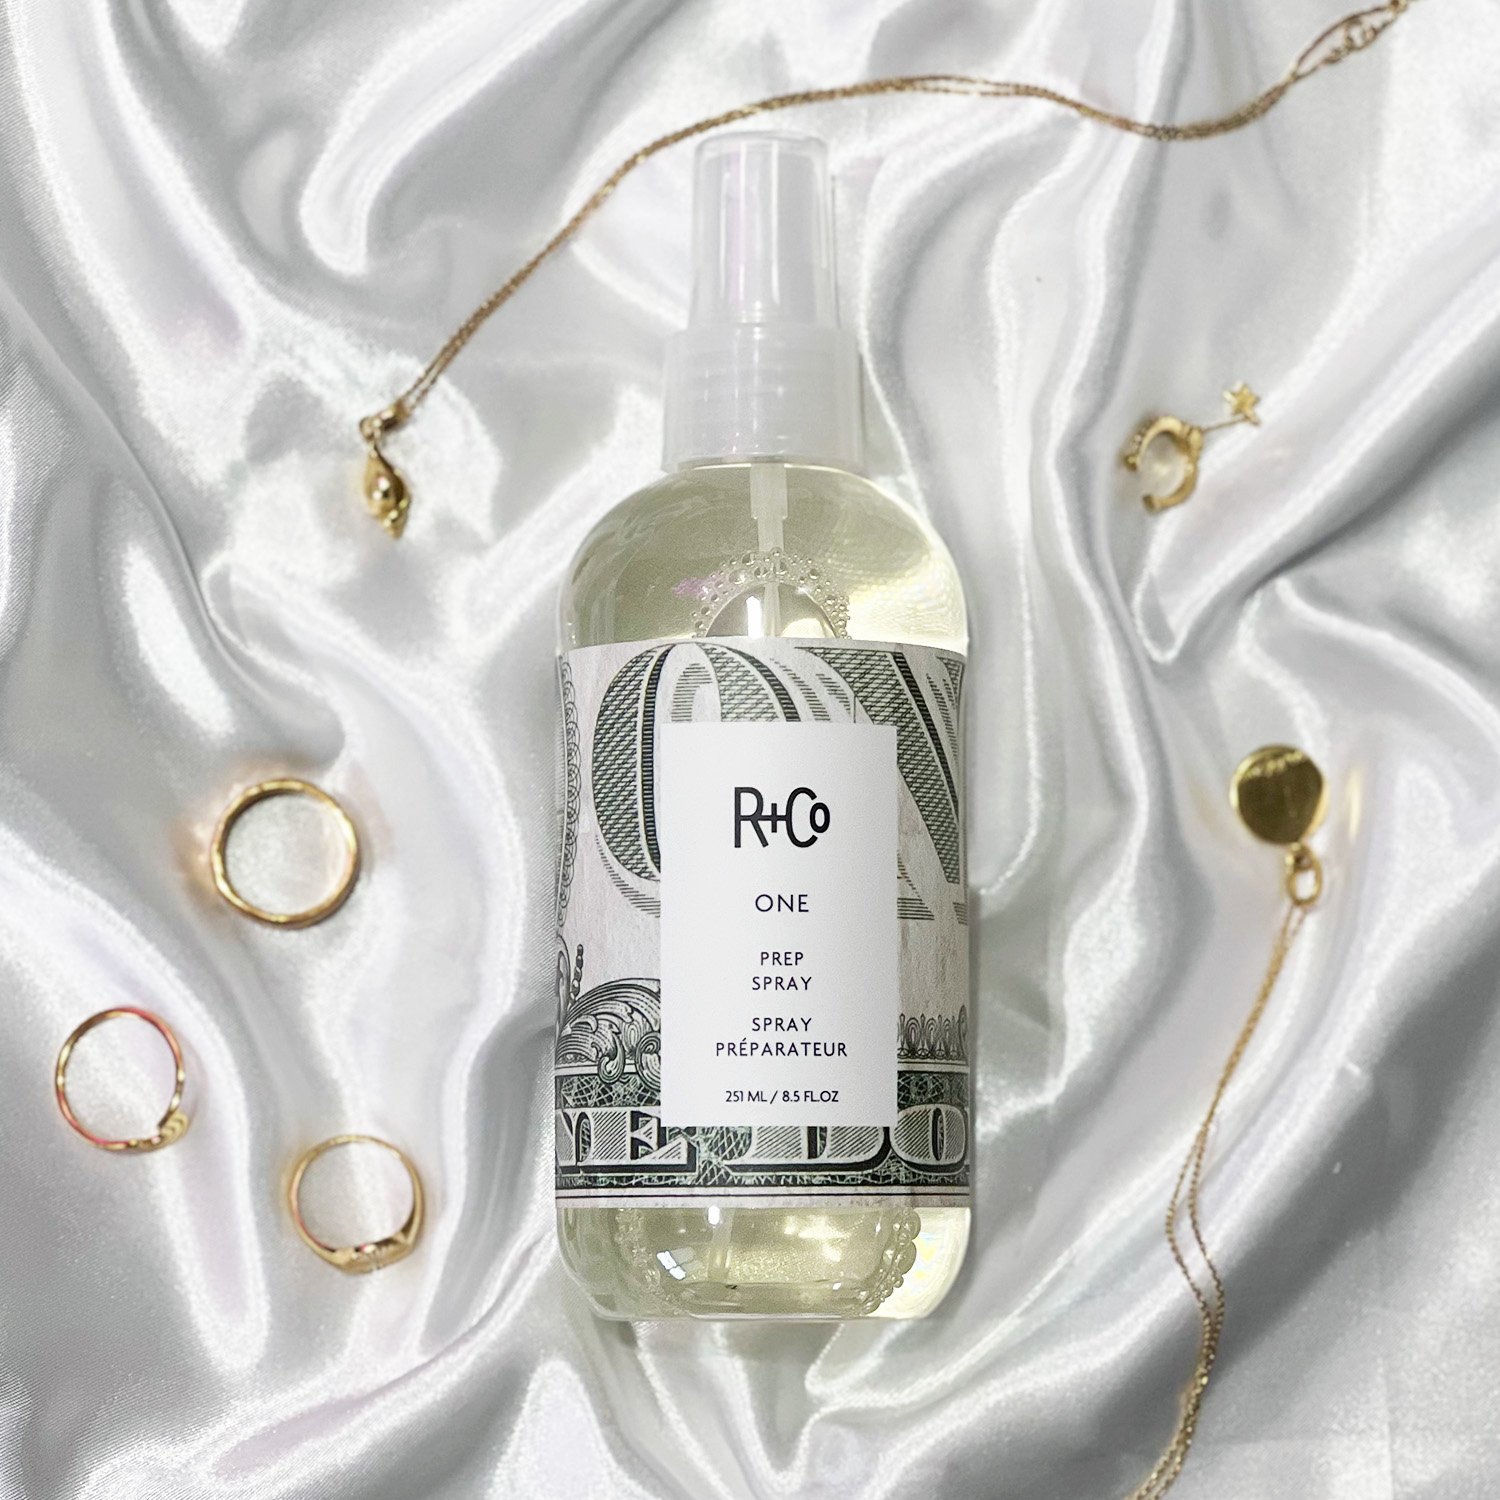 R+Co - Two-Way Mirror Smoothing Oil